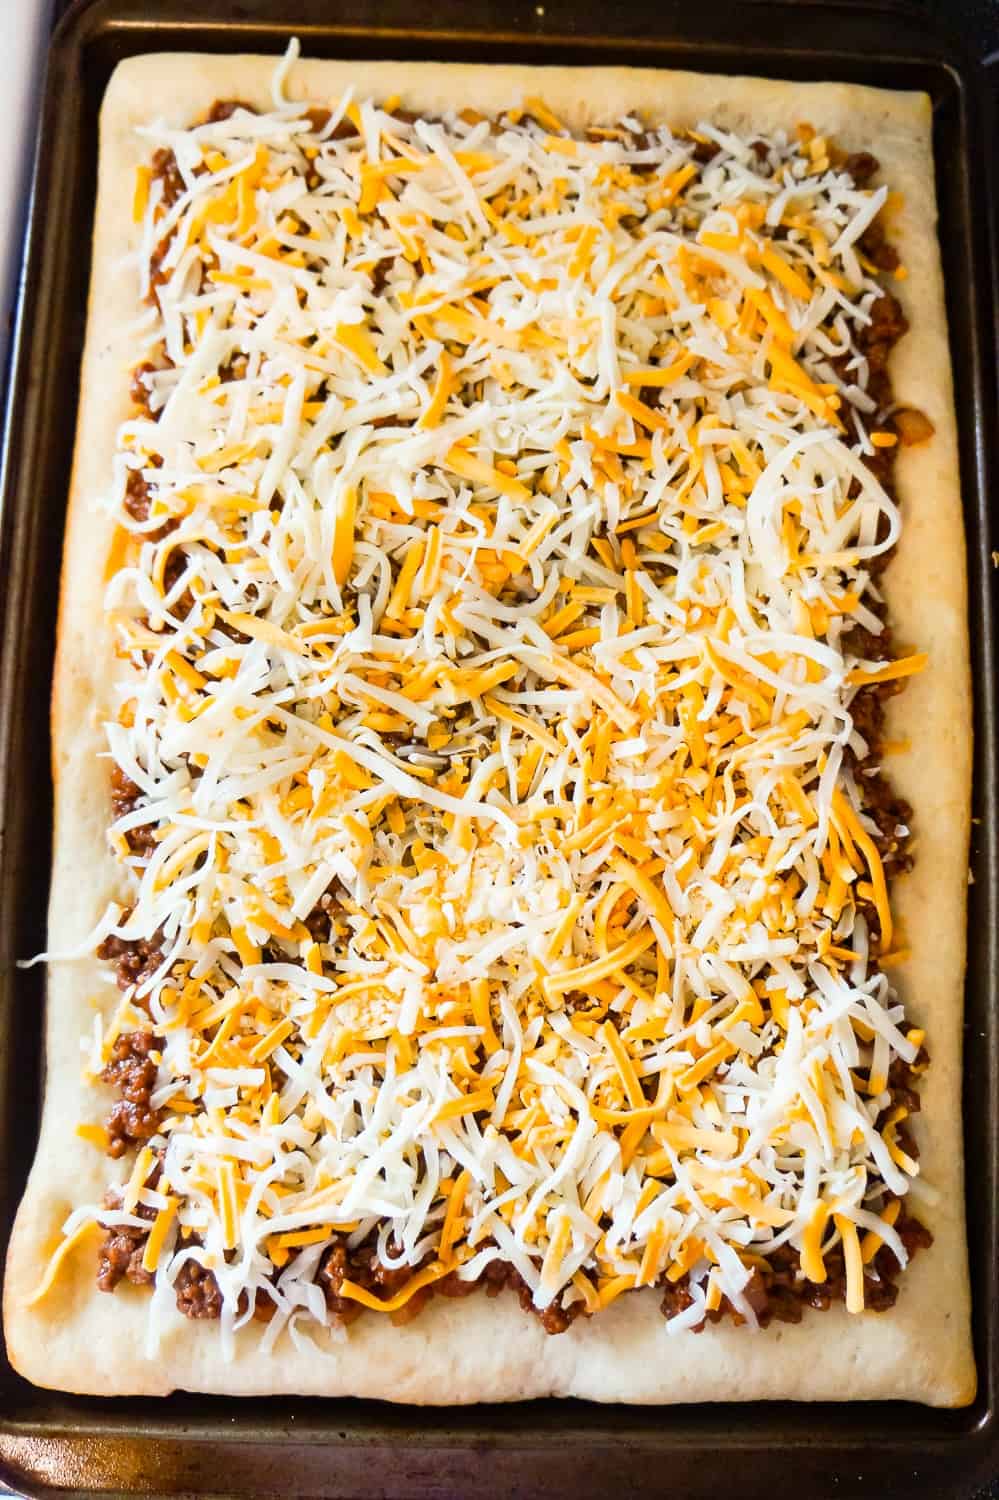 shredded mozzarella and cheddar cheese on top of sloppy joe pizza before baking